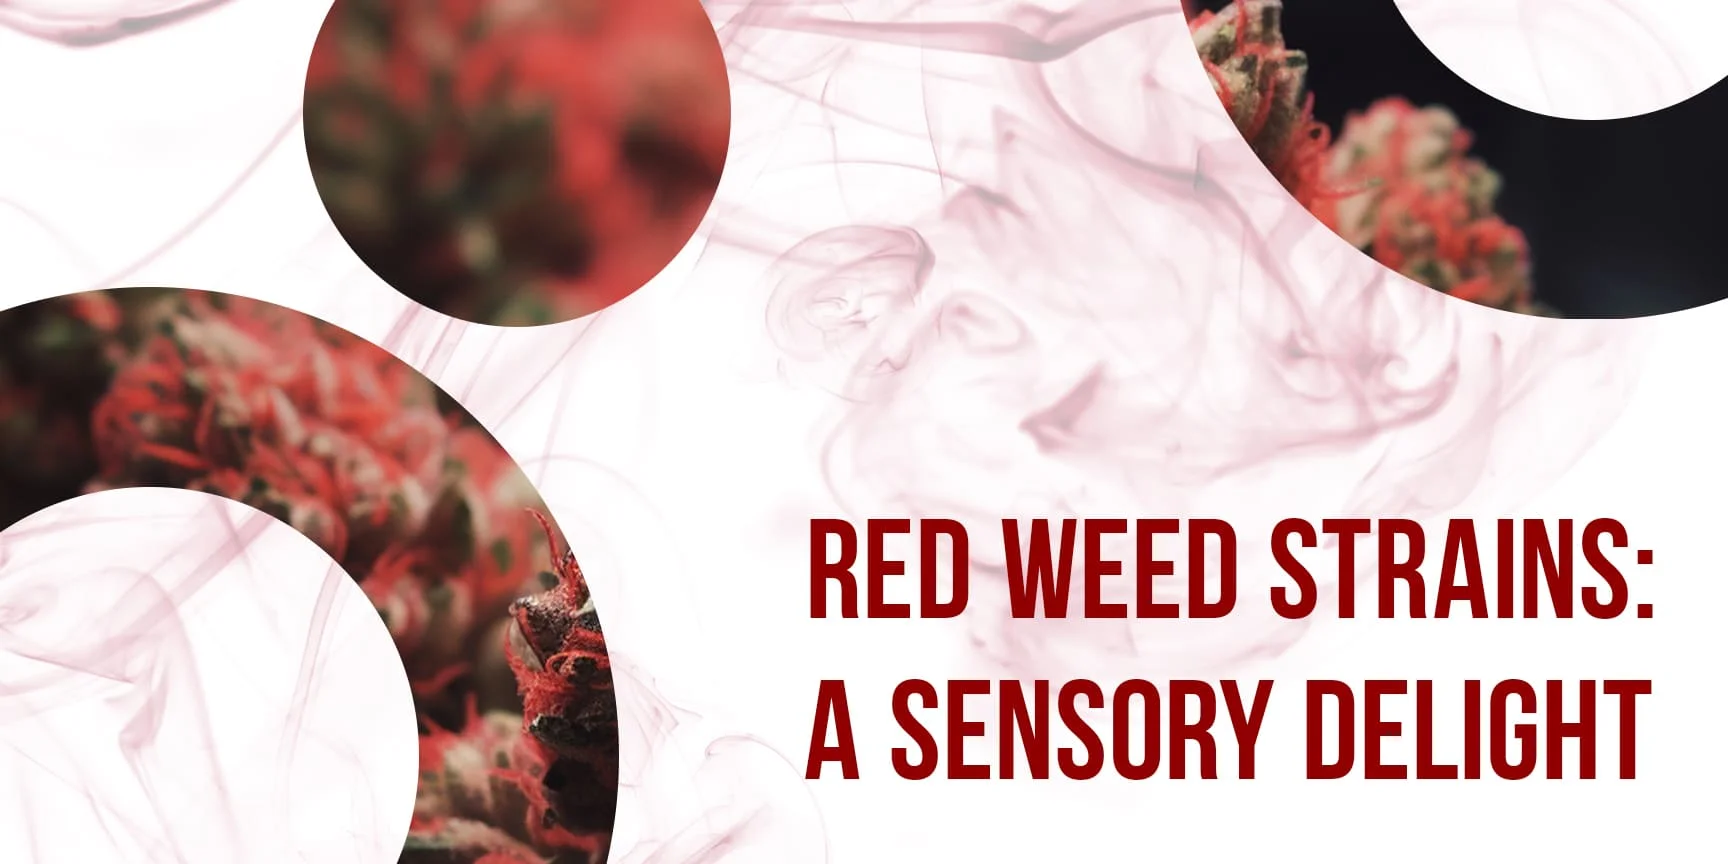 Red smoke, photos of red varieties and an inscription Red Weed Strains: A Sensory Delight